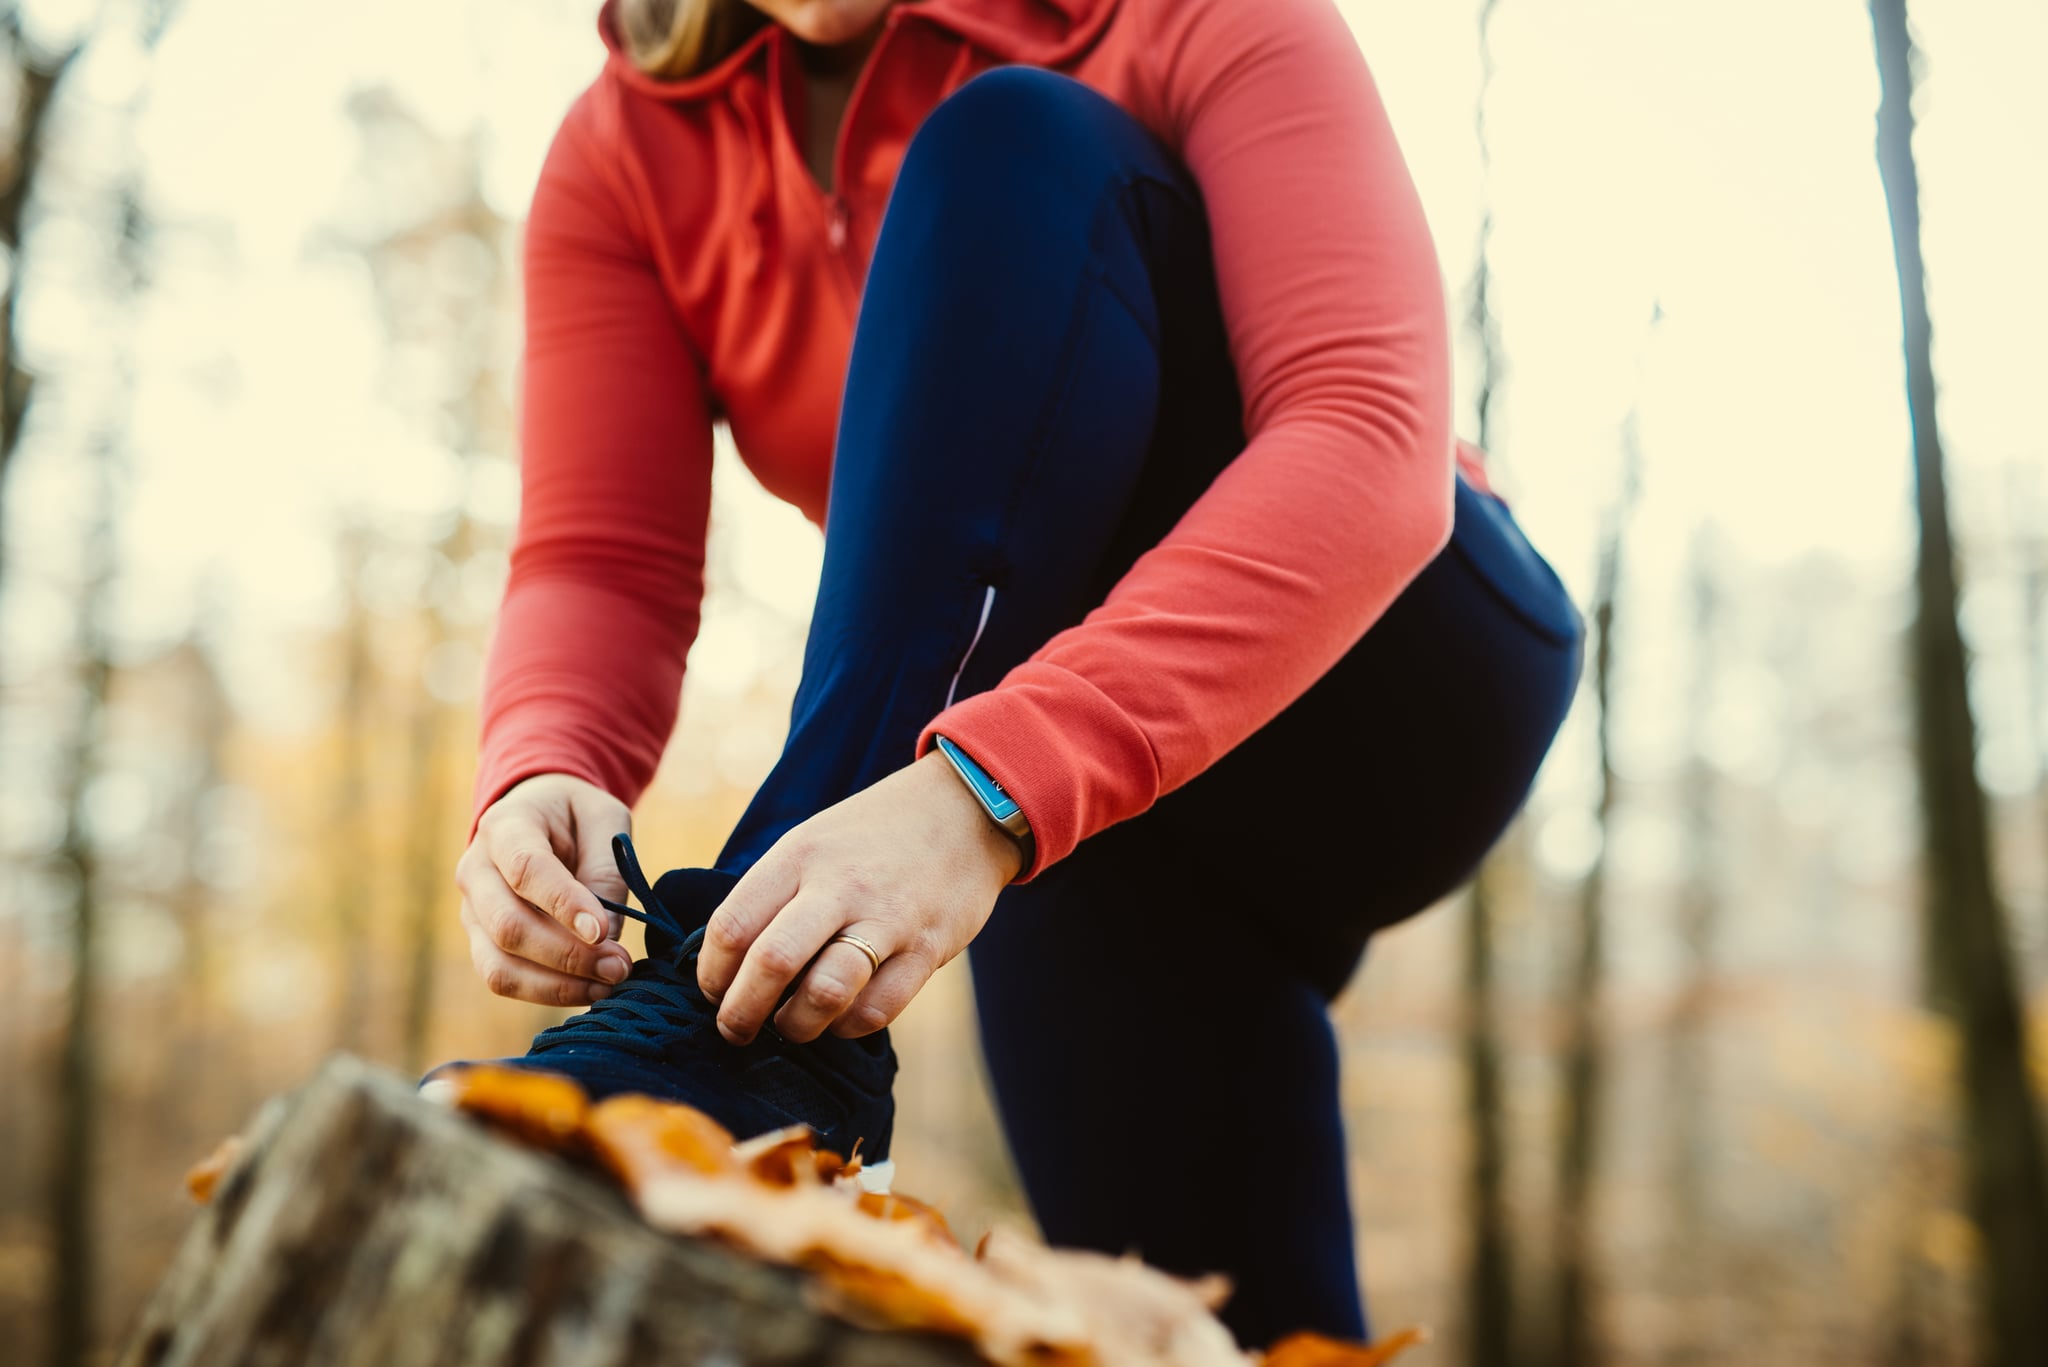 Woman fixing her shoelaces before jogging on a trunk.